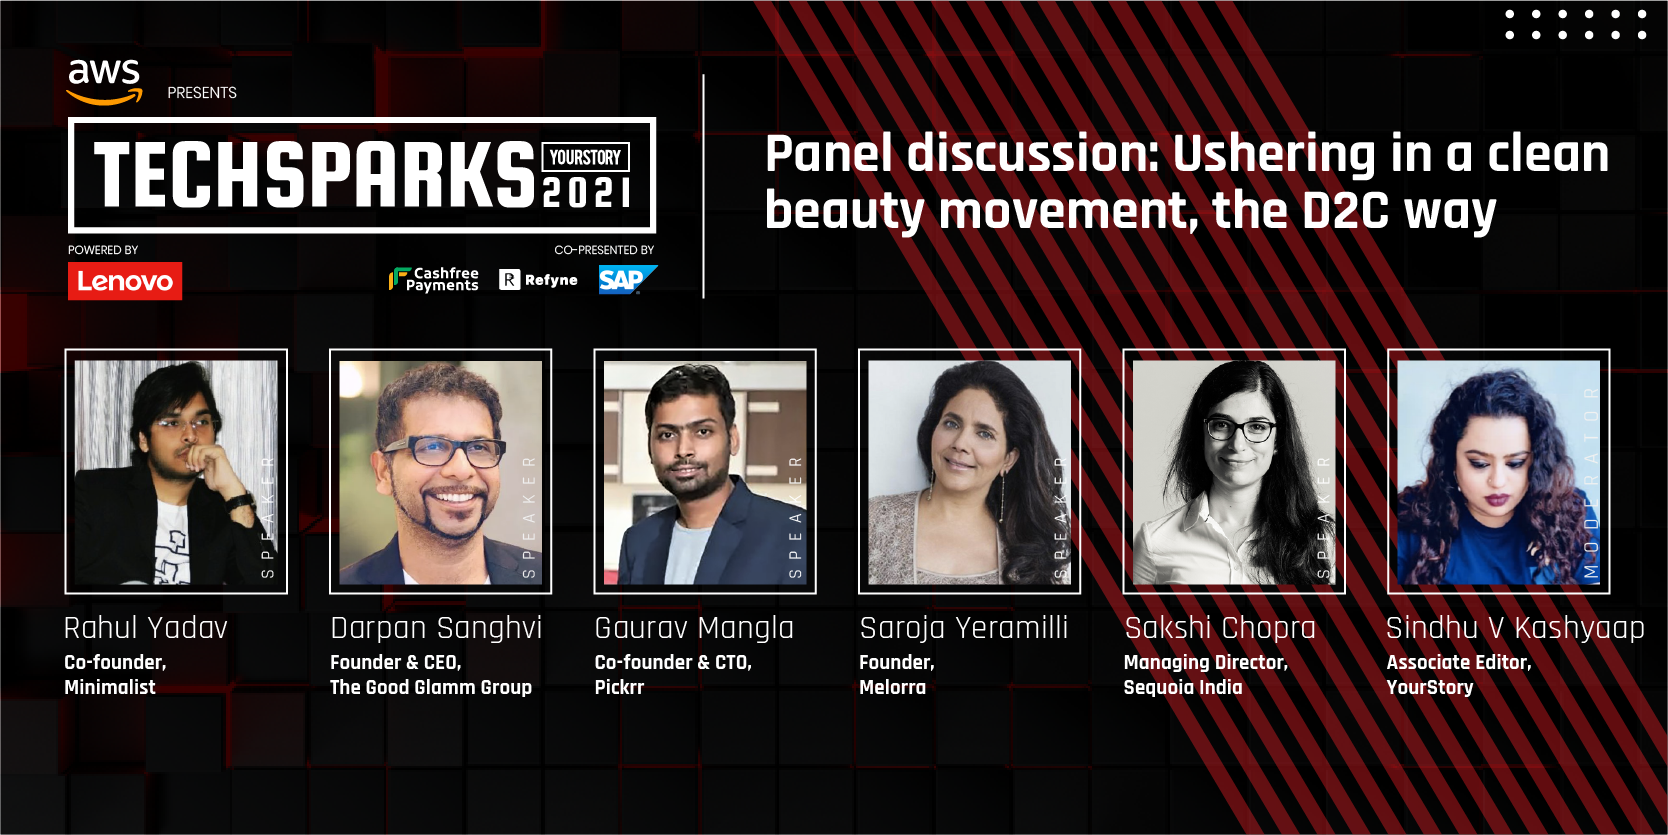 Startup founders unpack the D2C movement at TechSparks 2021